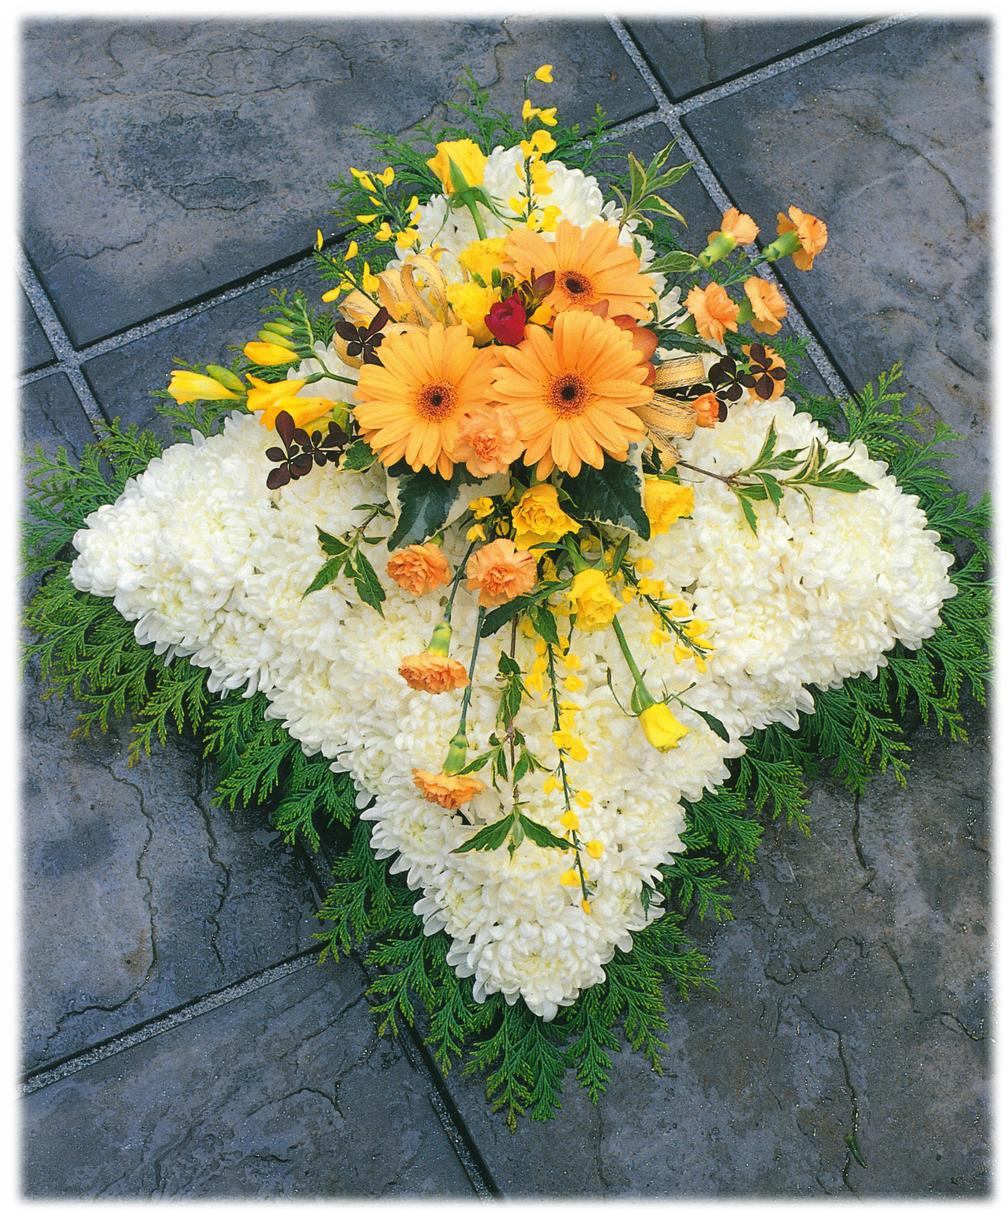 Floral Tributes | Funeral Directors in Portsmouth and Havant gallery image 13